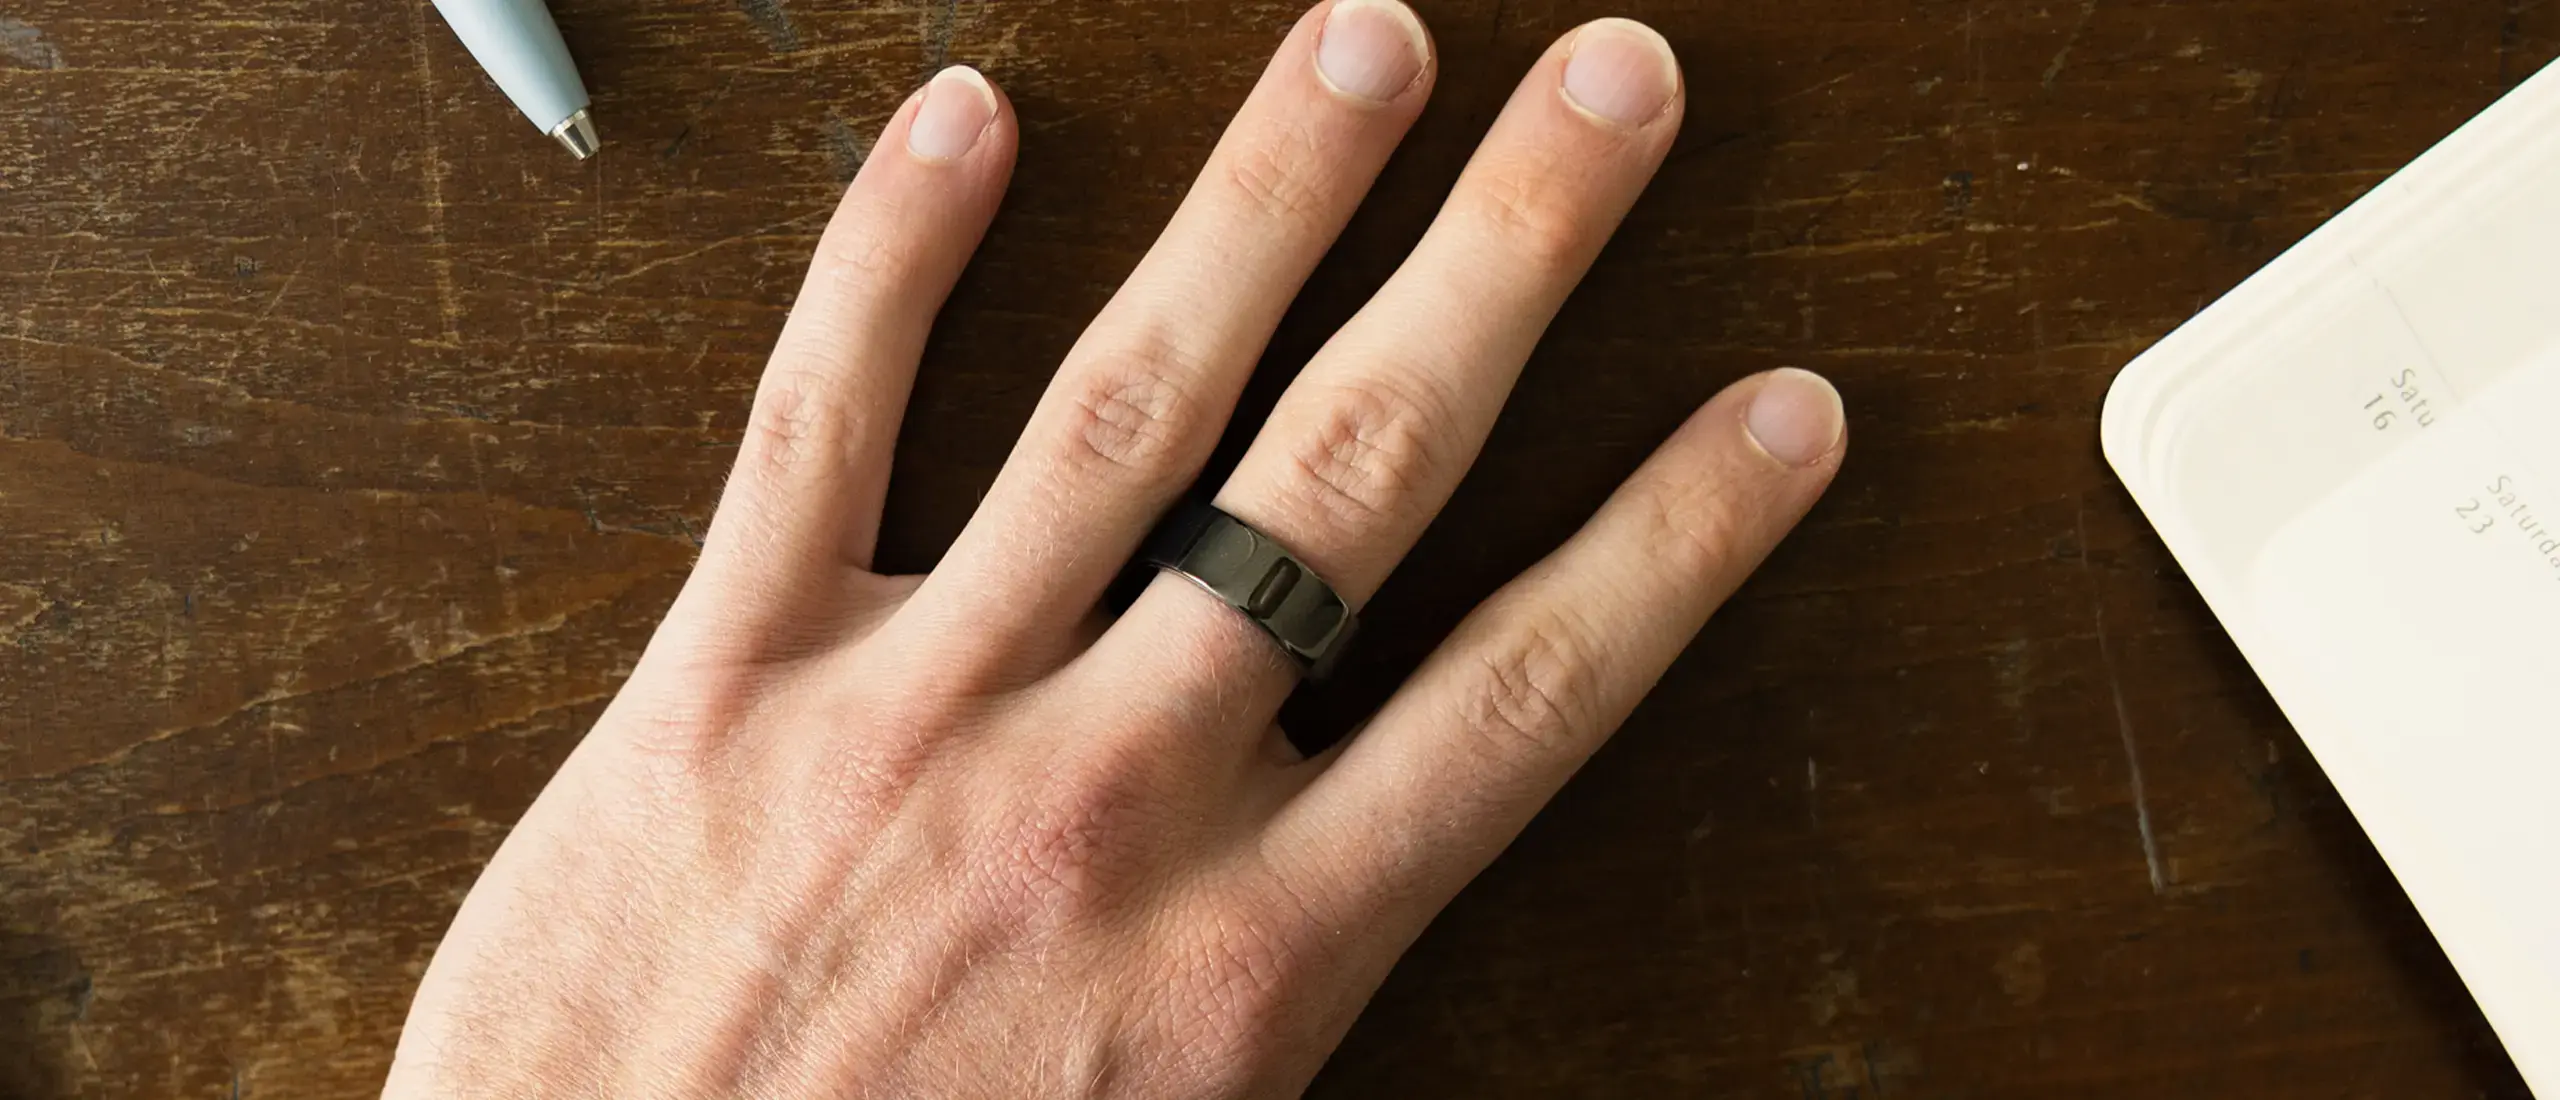 Oura Ring Gen 3 Review: New Sensors and Higher Prices